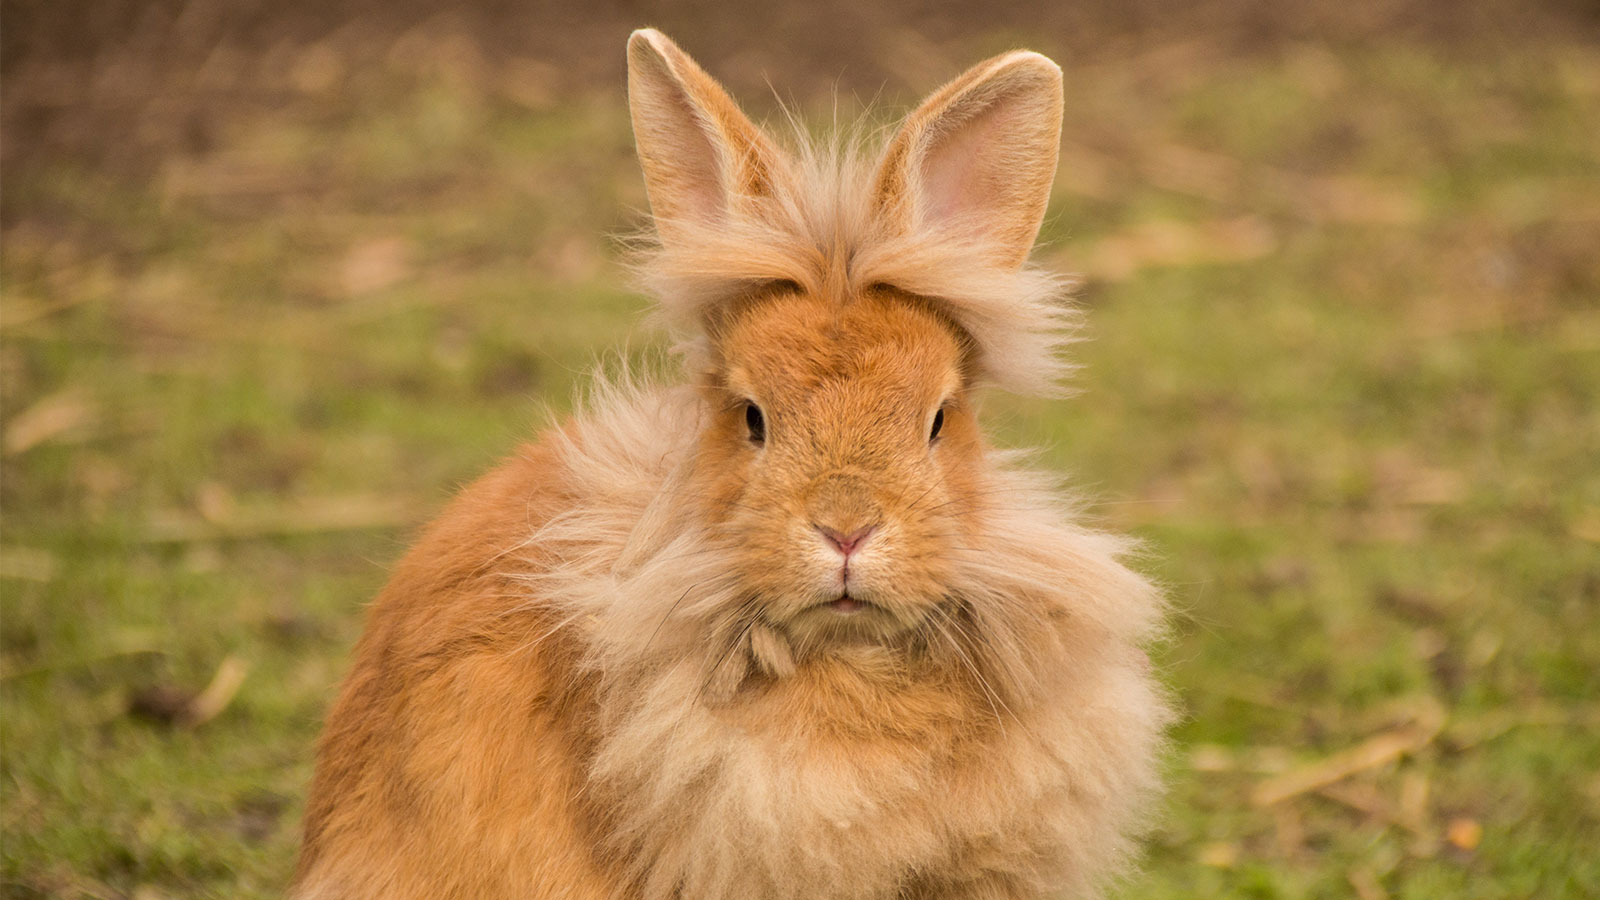 It's OK If You Don't Know Much About Animals. Take This Quiz to Learn Something New Lionhead rabbit